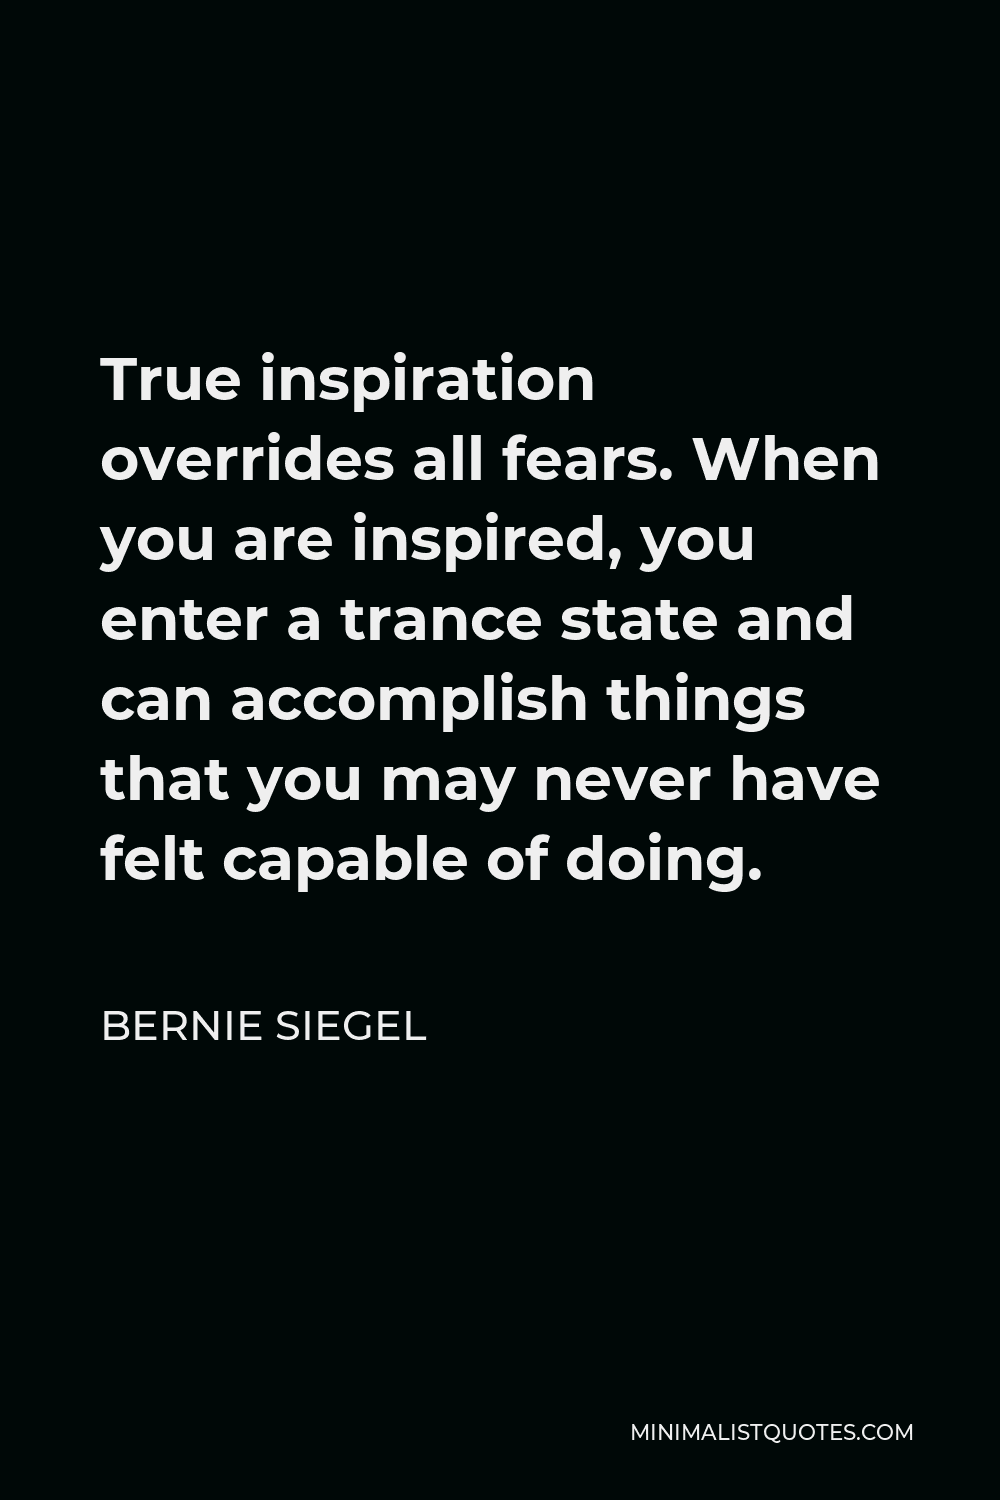 Bernie Siegel Quote - True inspiration overrides all fears. When you are inspired, you enter a trance state and can accomplish things that you may never have felt capable of doing.